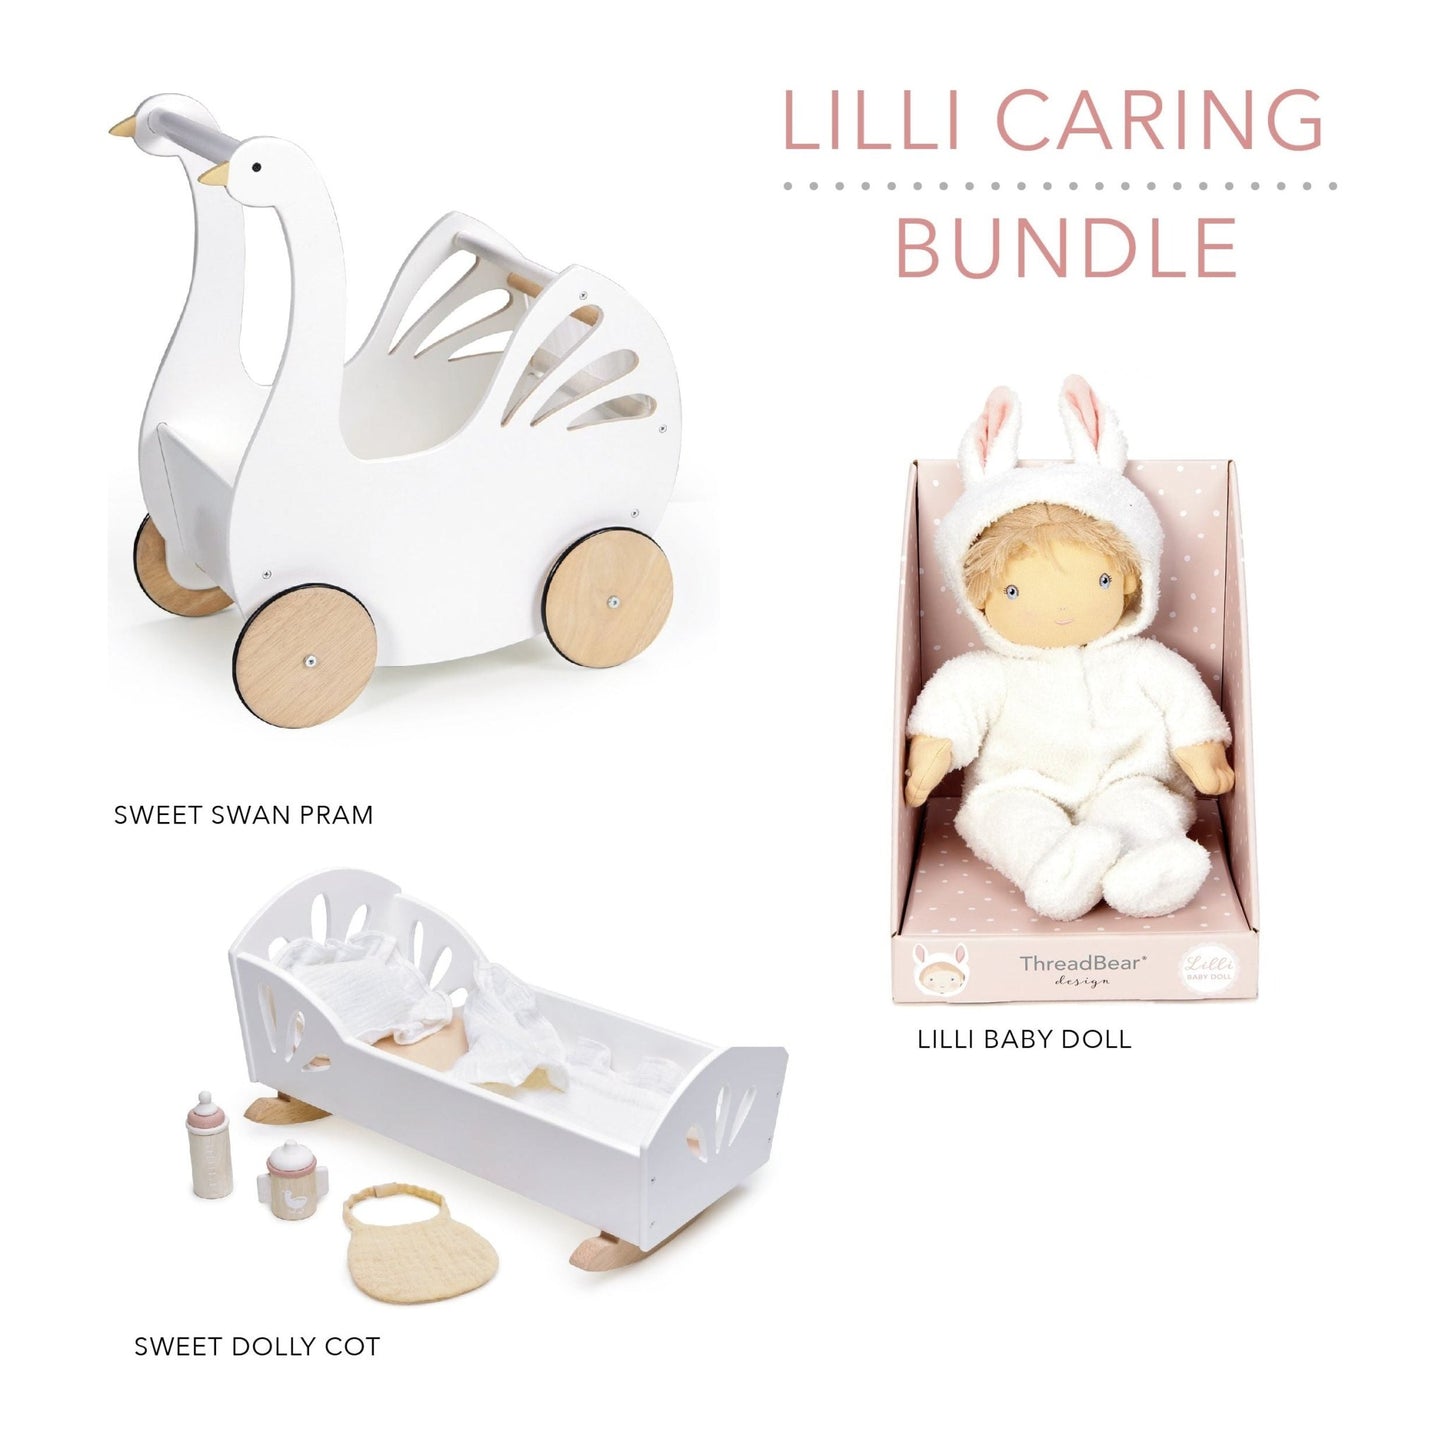 Lilli Caring Bundle - The Online Toy Shop - Wooden Role Play Toy - 2